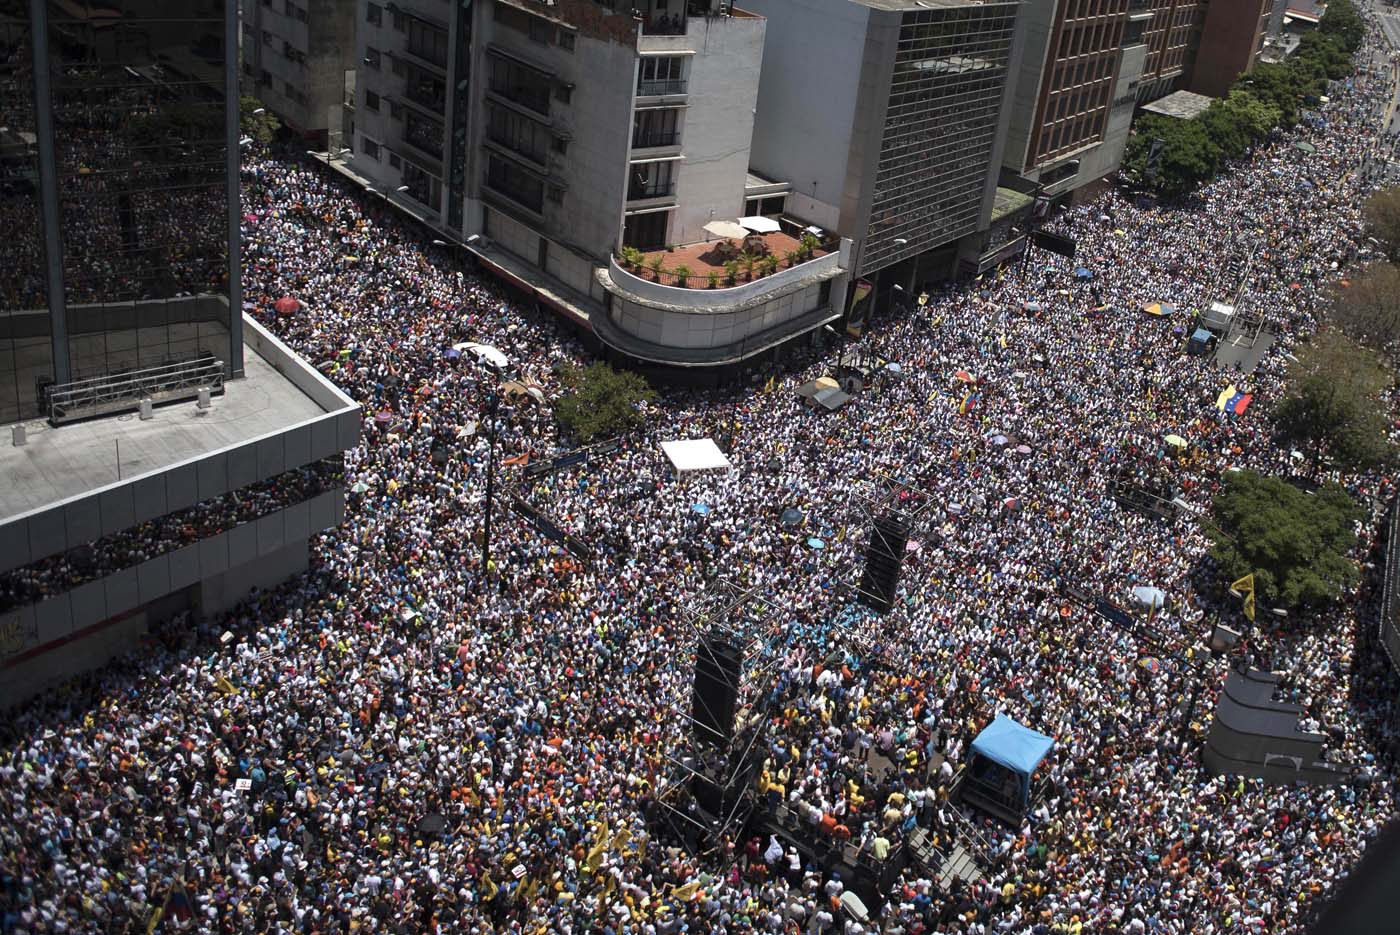 Thousands of demonstrators protesting against President Nicolas Maduro's government march in Caracas on April 8, 2017.  The opposition is accusing pro-Maduro Supreme Court judges of attempting an internal "coup d'etat" for attempting to take over the opposition-majority legislature's powers last week. The socialist president's supporters held counter-demonstrations on Thursday, condemning Maduro's opponents as "imperialists" plotting with the United States to oust him.  / AFP PHOTO / CARLOS BECERRA